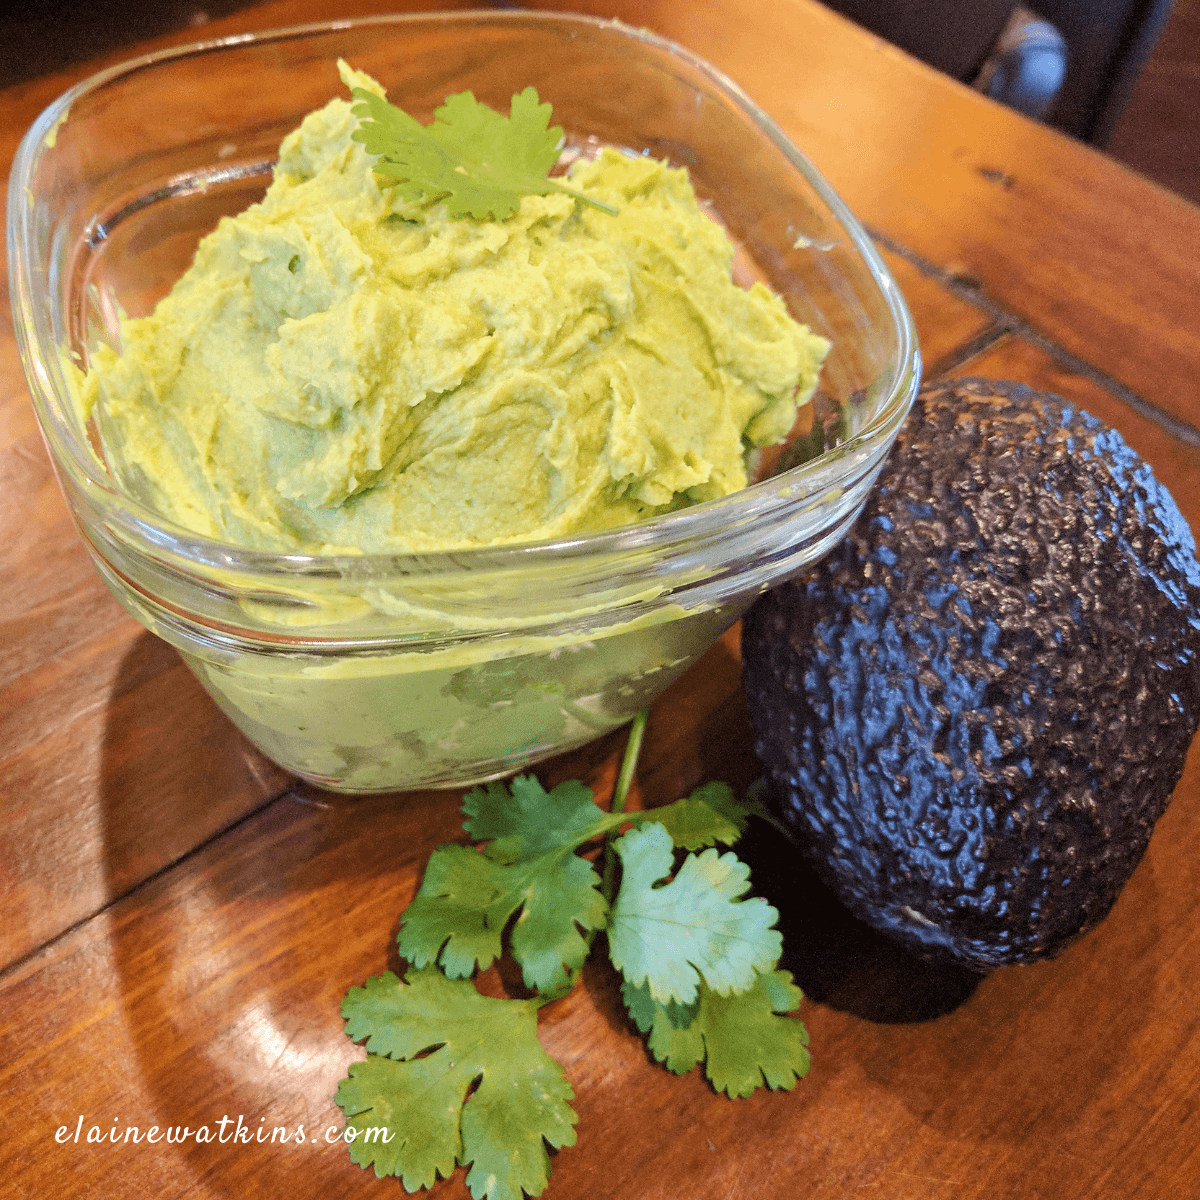 How to Make Our Easy and Healthy Avocado Hummus